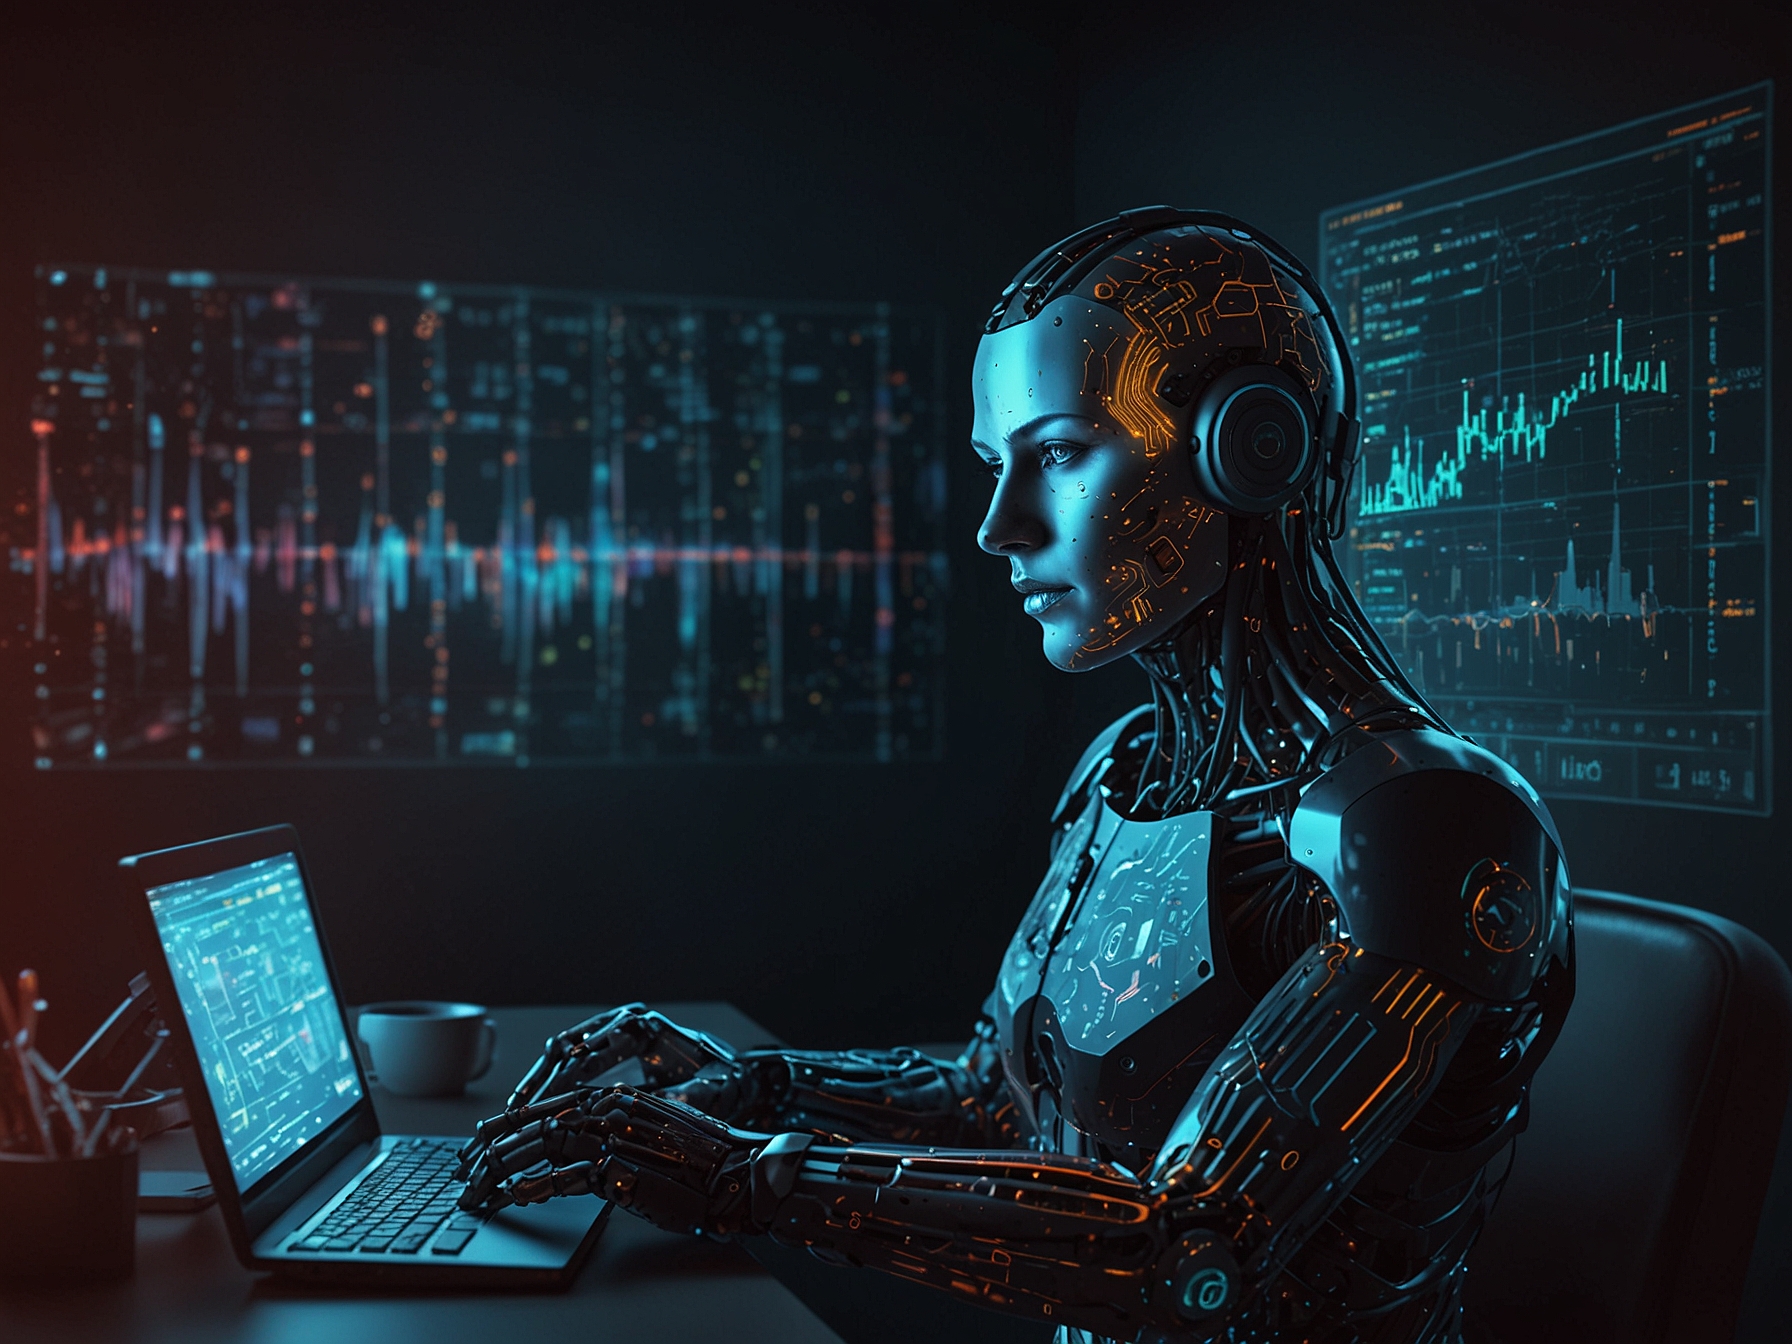 A visual representation of AI algorithms analyzing data in real-time, detecting and flagging threats, showcasing the speed and efficiency AI brings to cybersecurity operations.